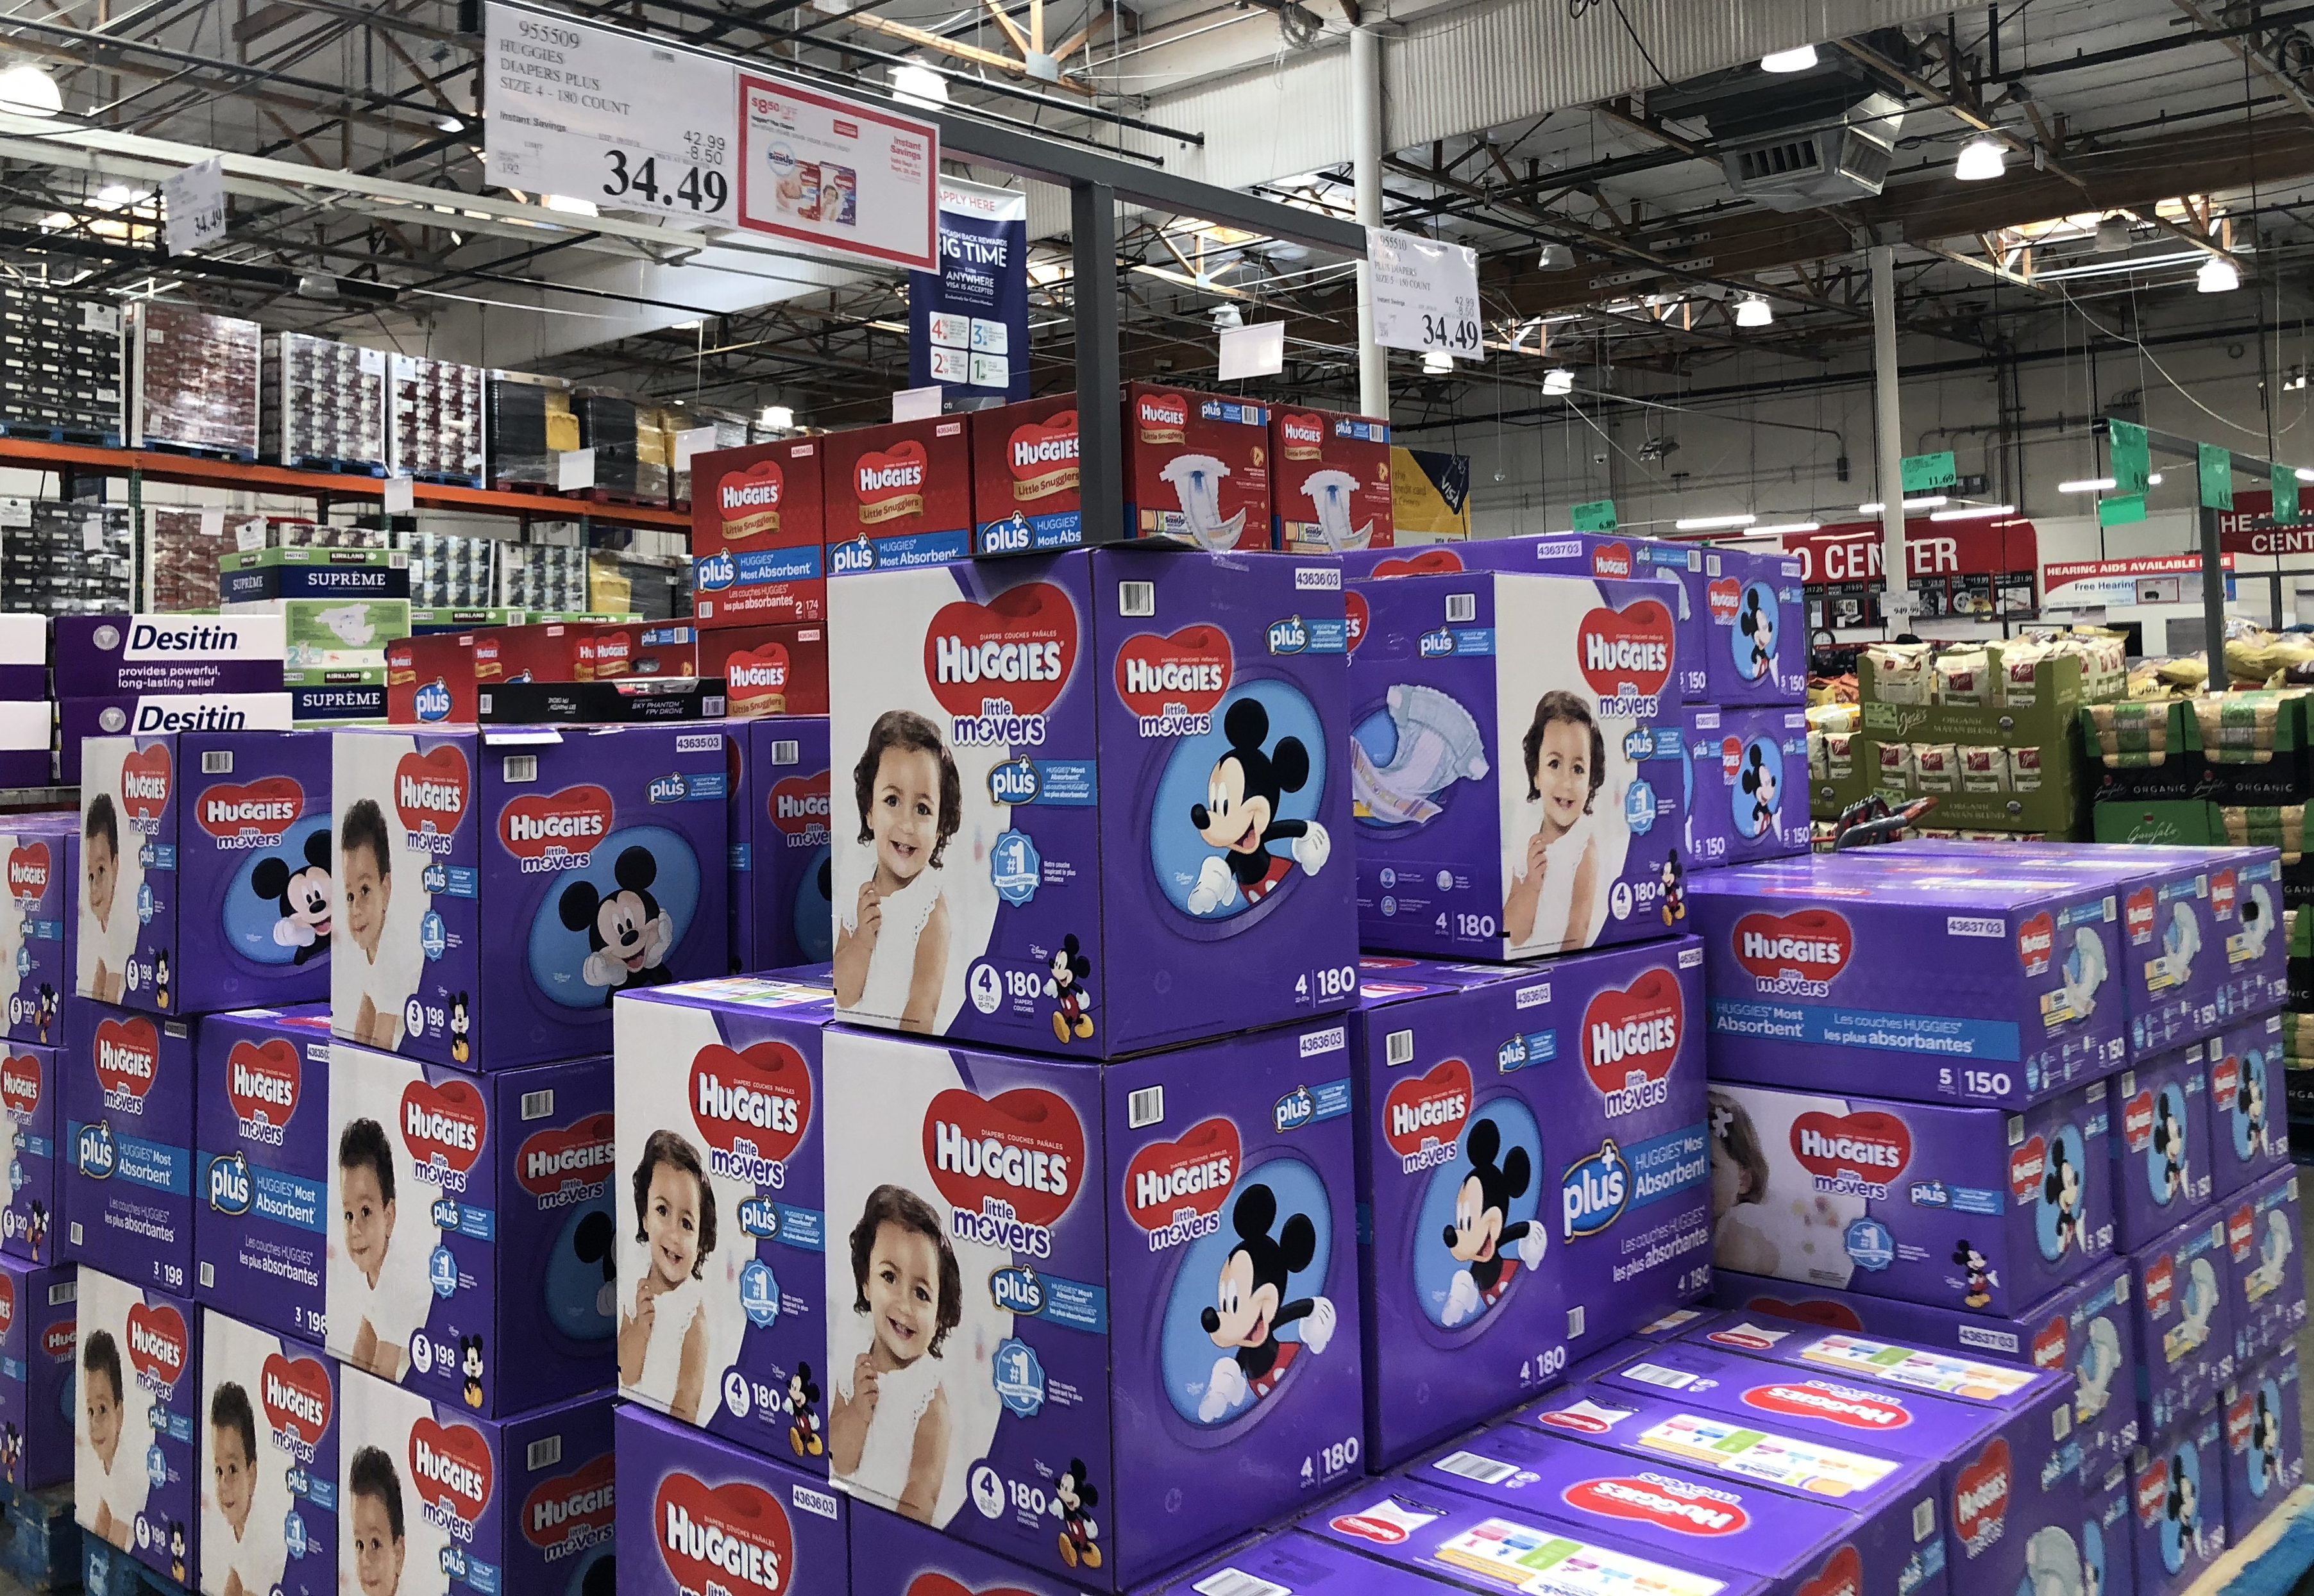 Costco Monthly Deals for September 2018 - Huggies diapers at Costco